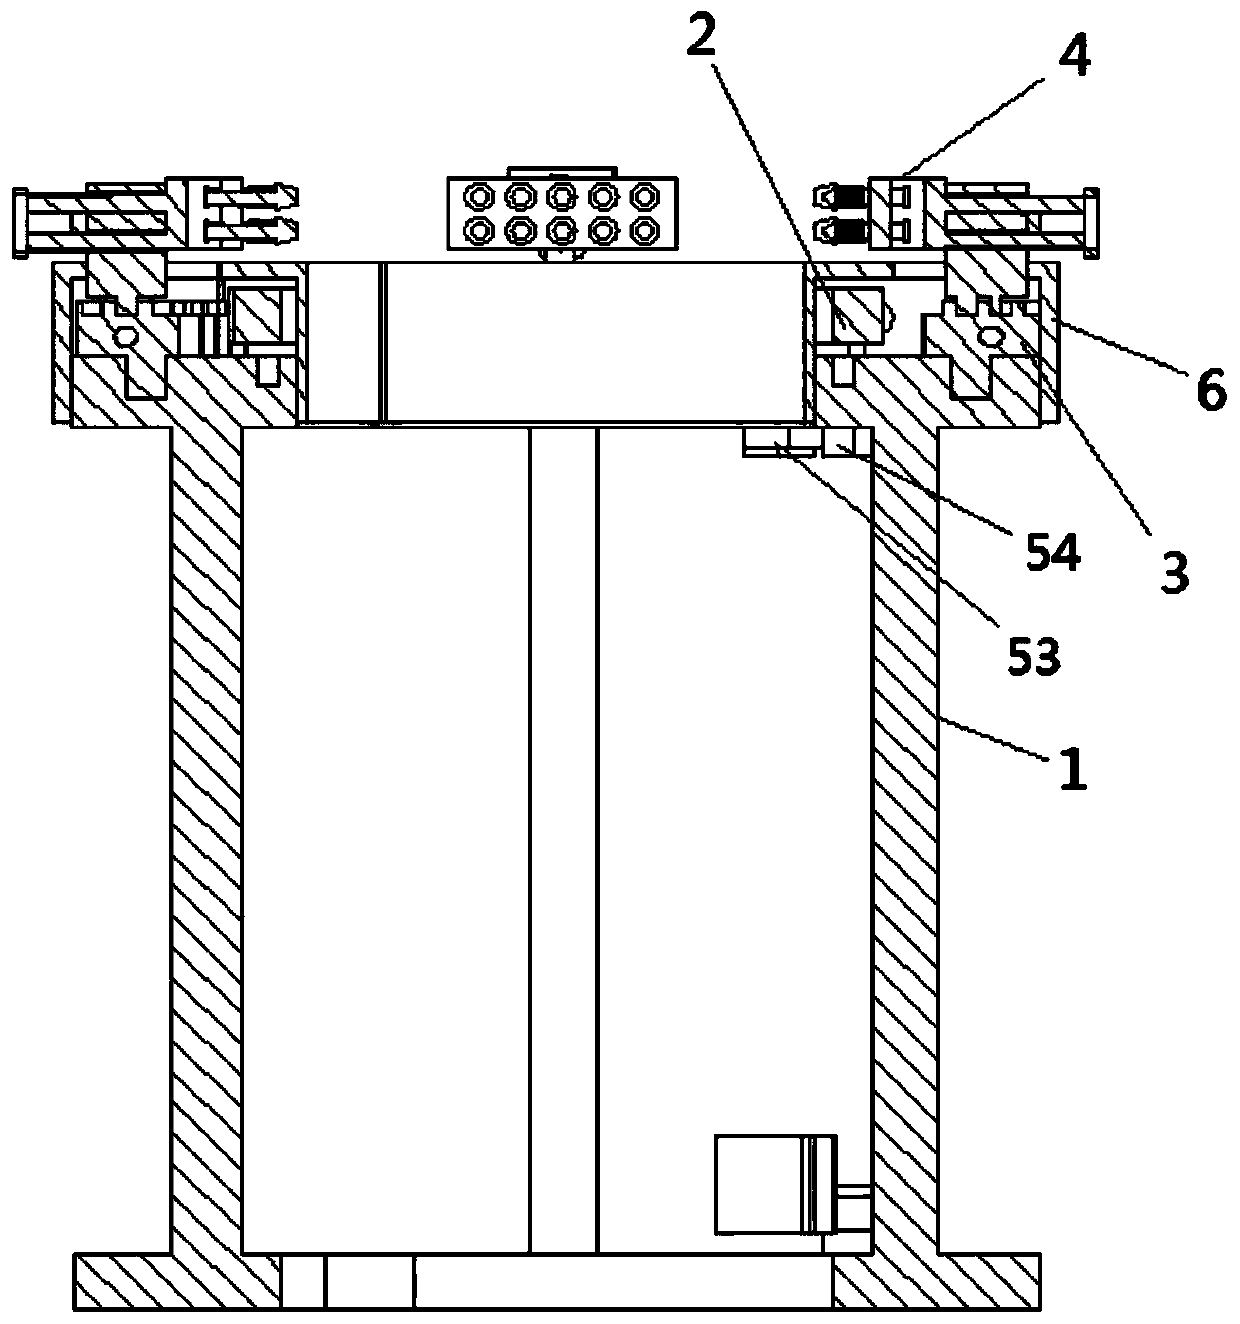 Auxiliary equipment for reinforcing bearing column used in building construction